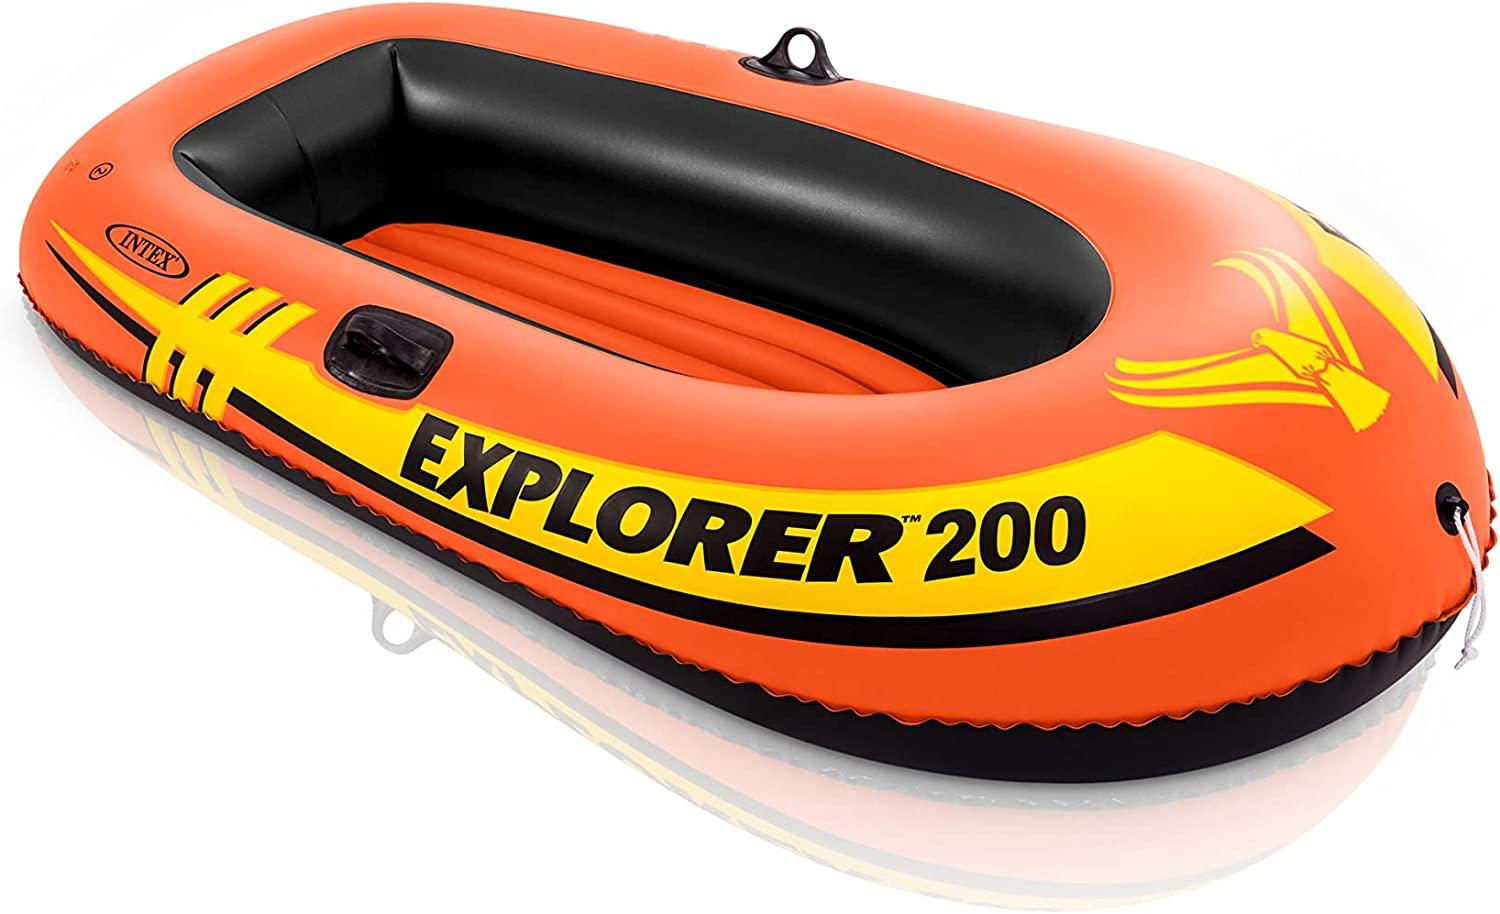 Intex Explorer 200 2-Person Inflatable Boat for $12.57